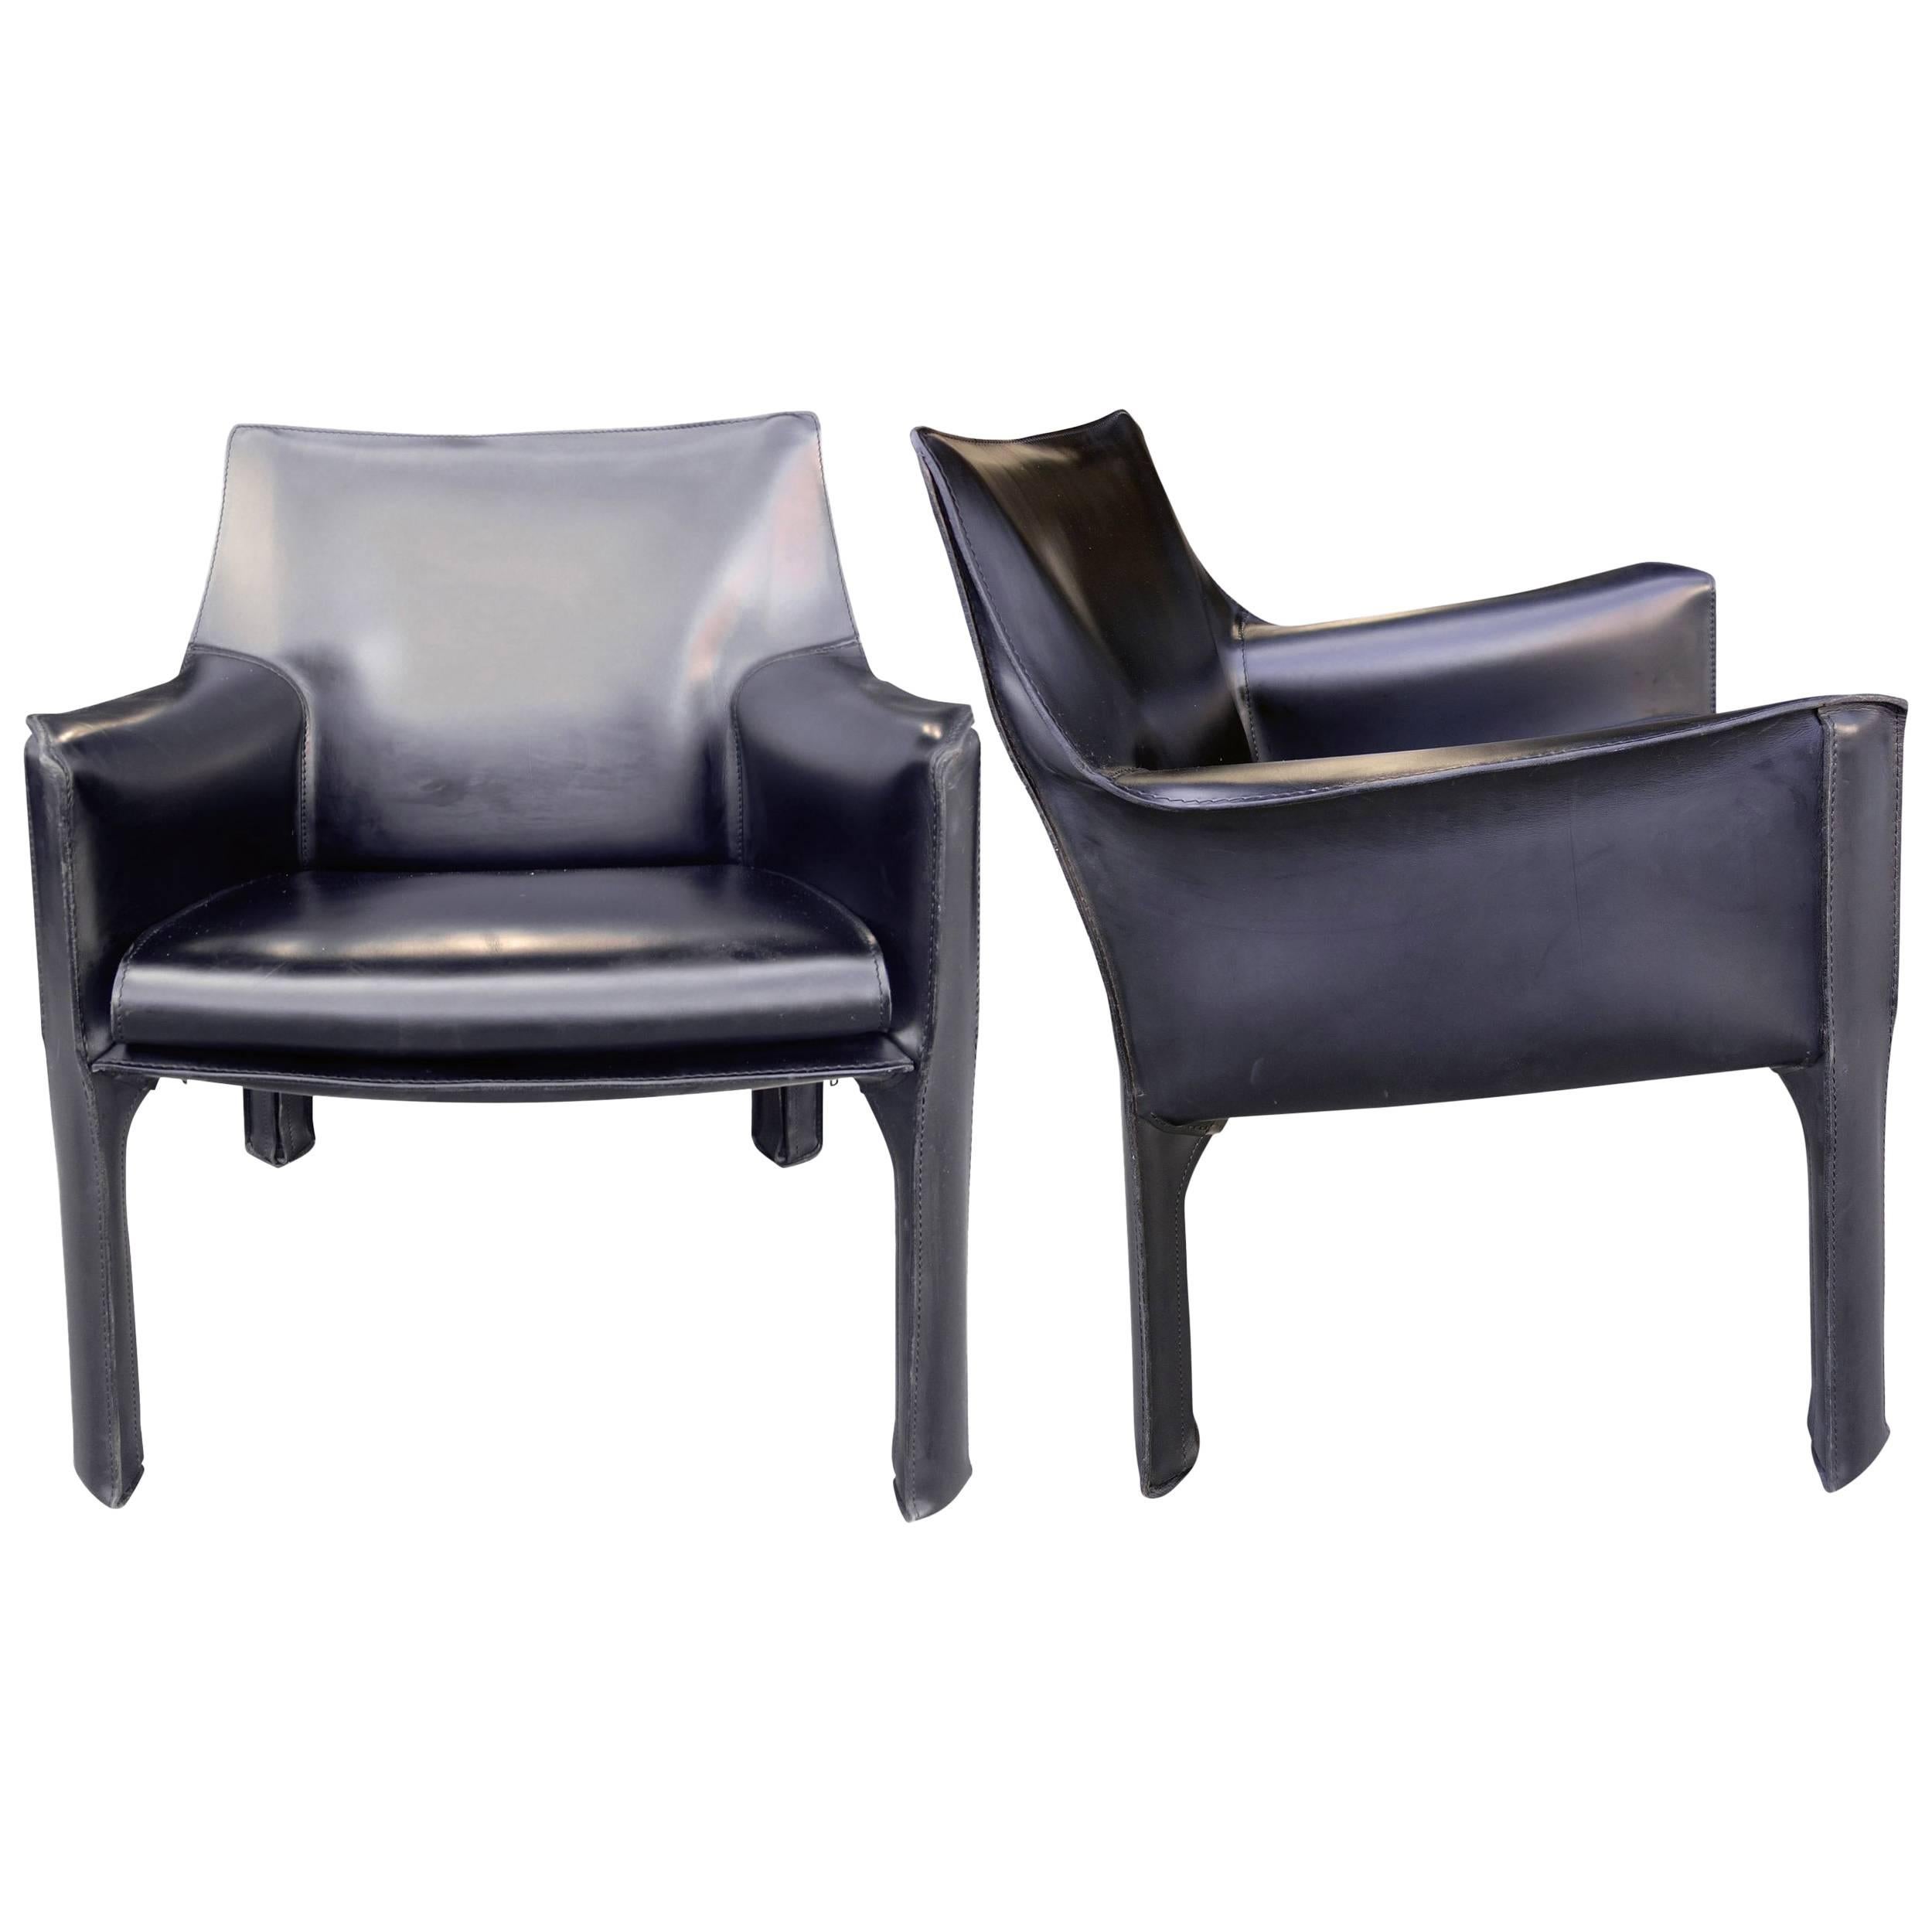 Cassina Cab Lounge Chairs by Mario Bellini